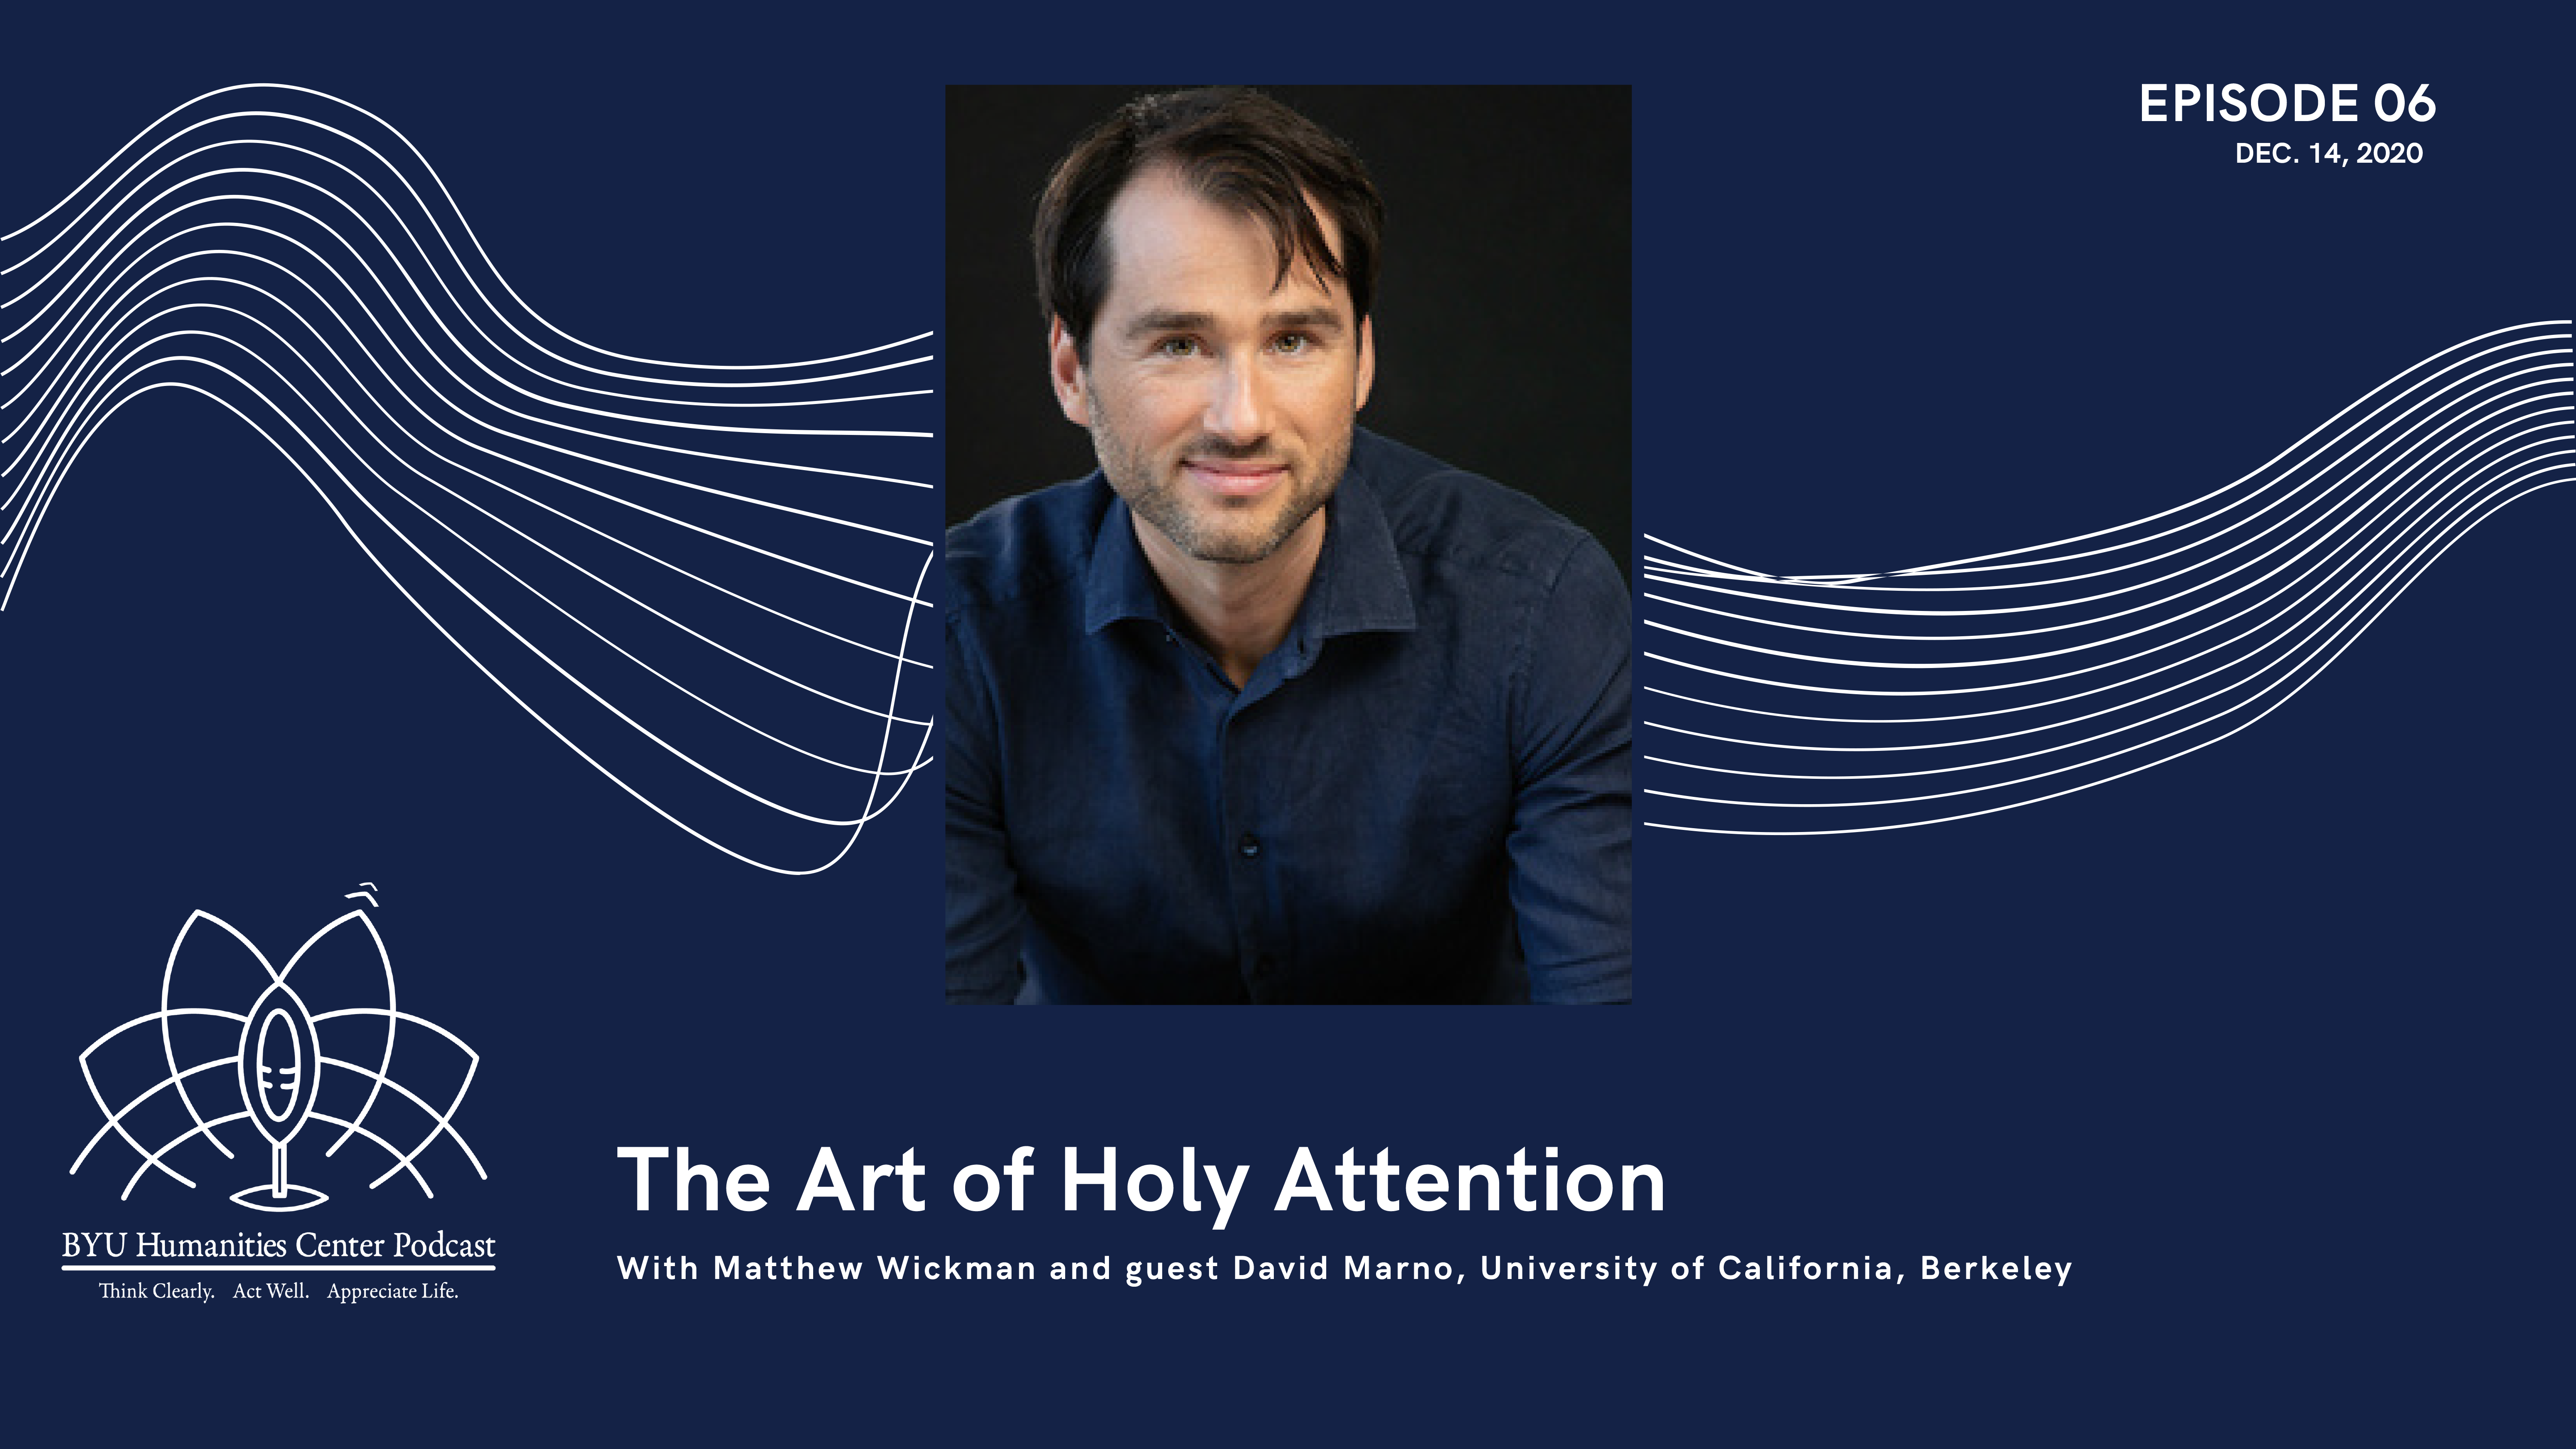 &#8220;The Art of Holy Attention,&#8221; with guest David Marno, University of California, Berkeley